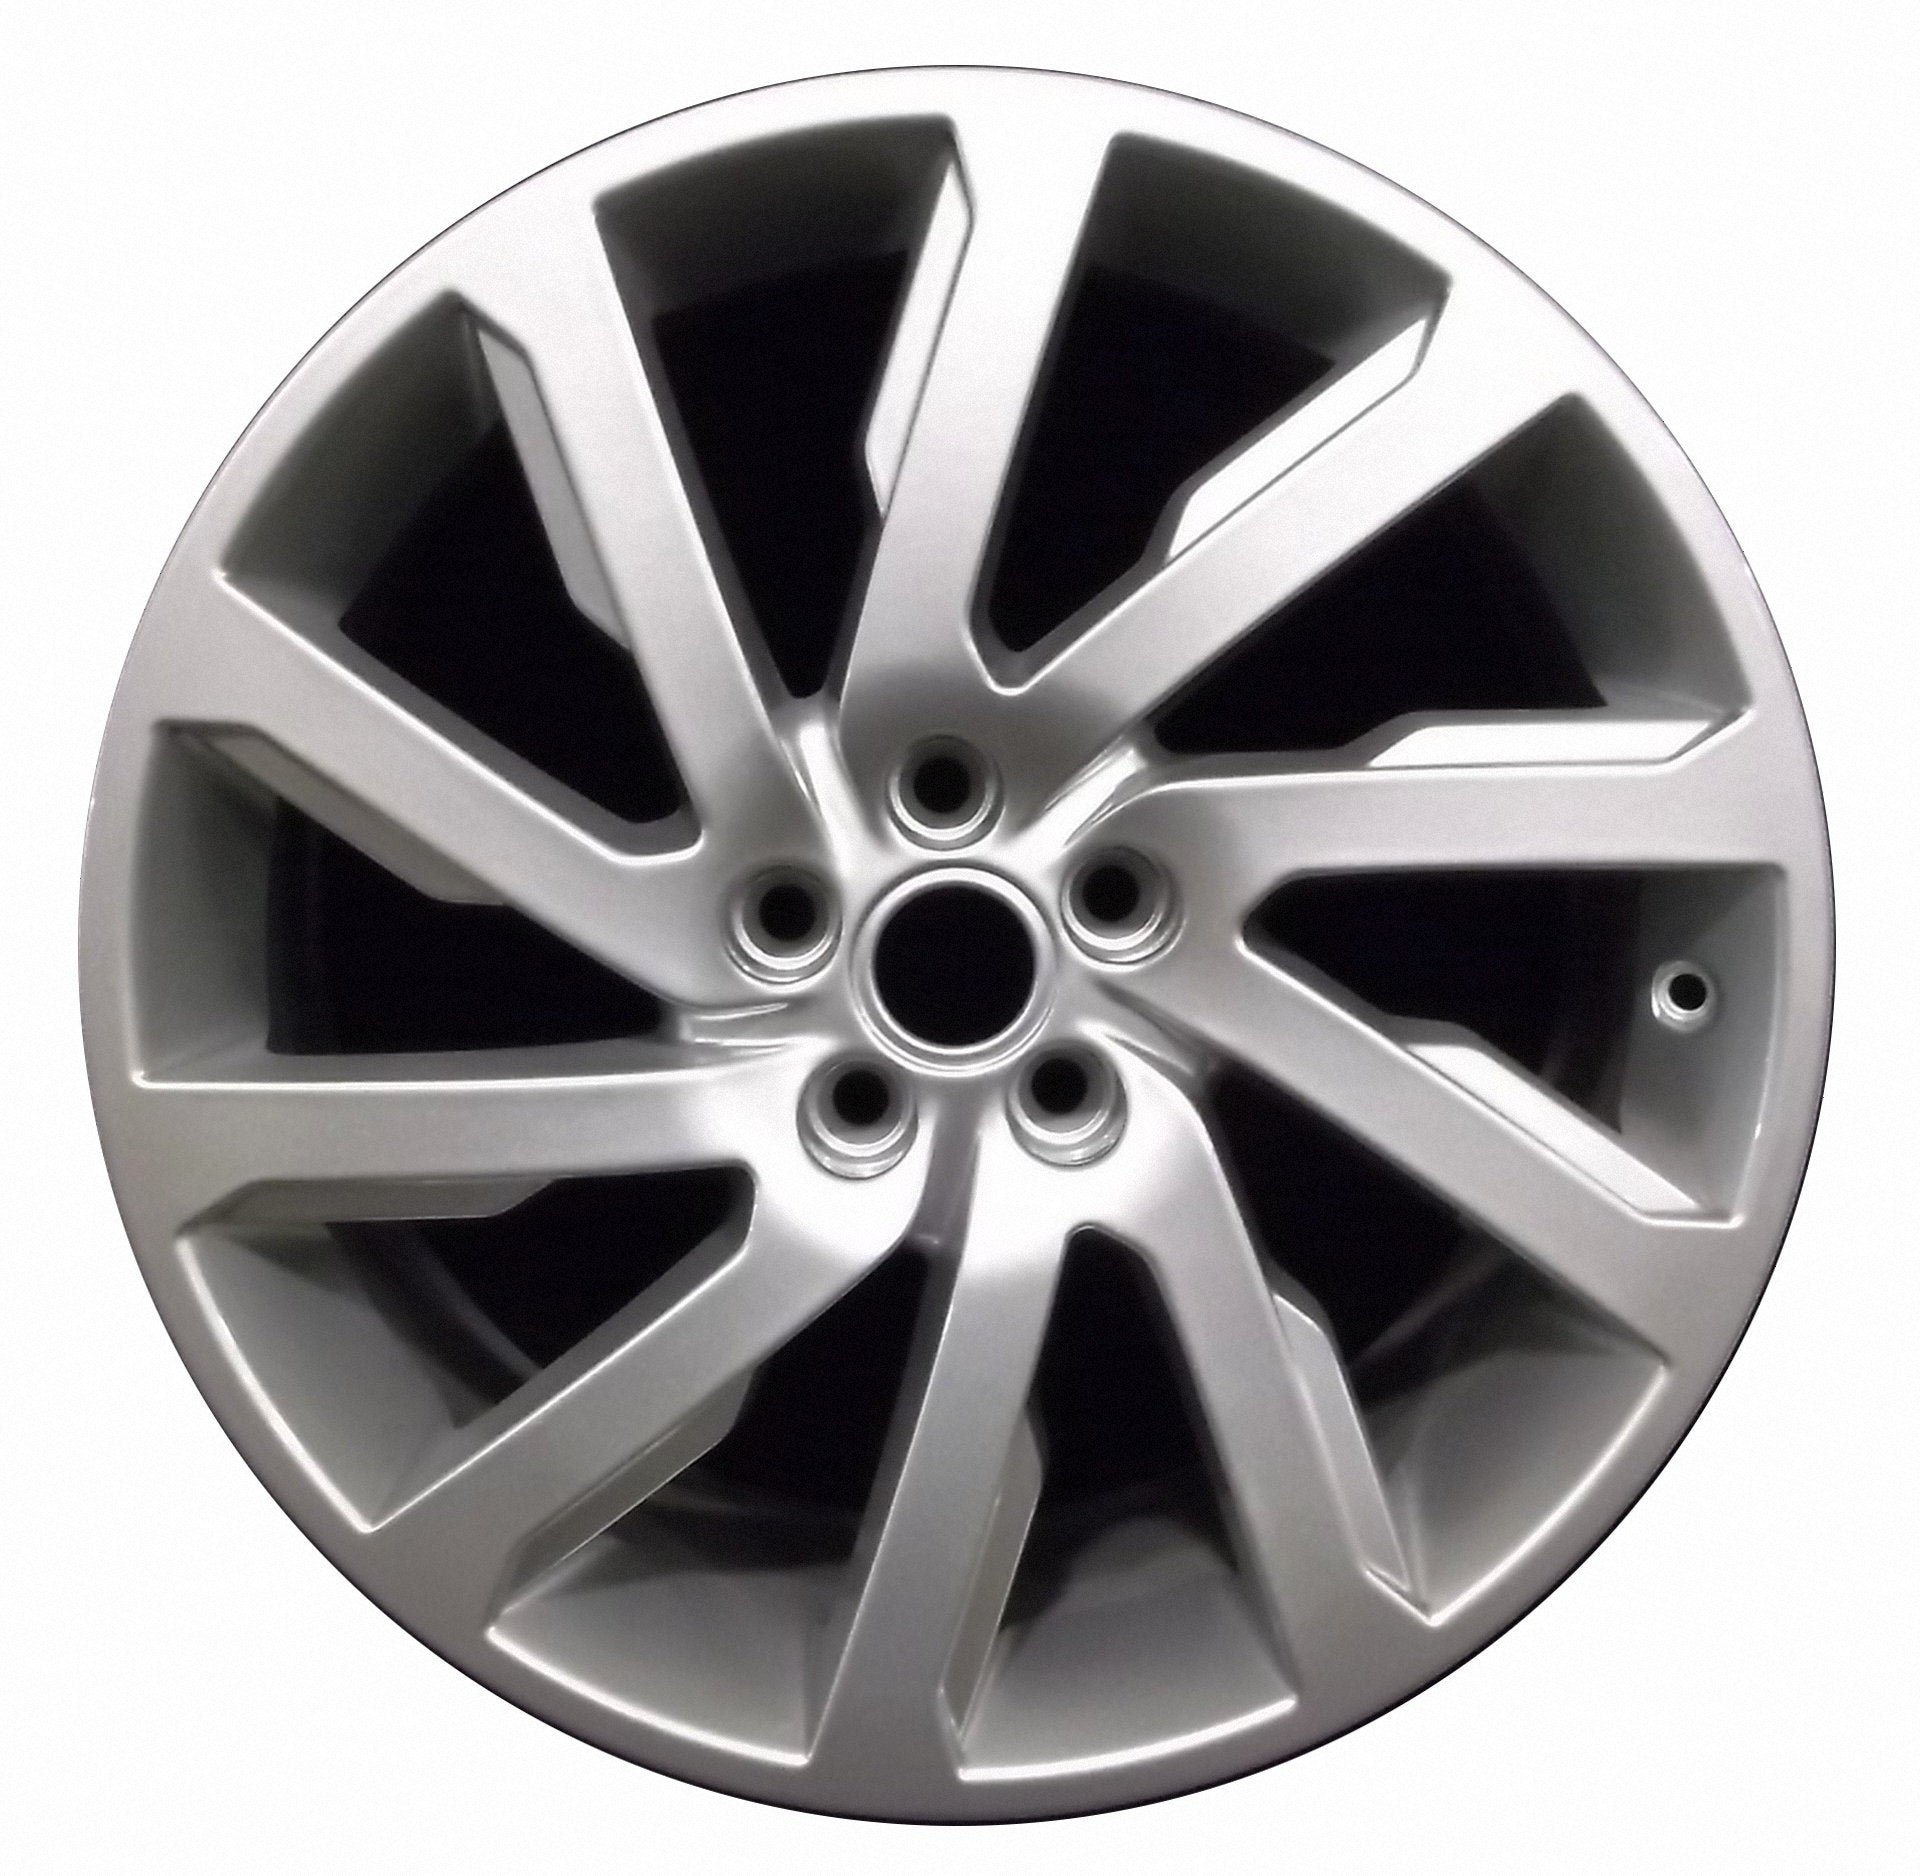 Land Rover LR2  2011, 2012, 2013, 2014, 2015 Factory OEM Car Wheel Size 19x8 Alloy WAO.72227.PS08.FF